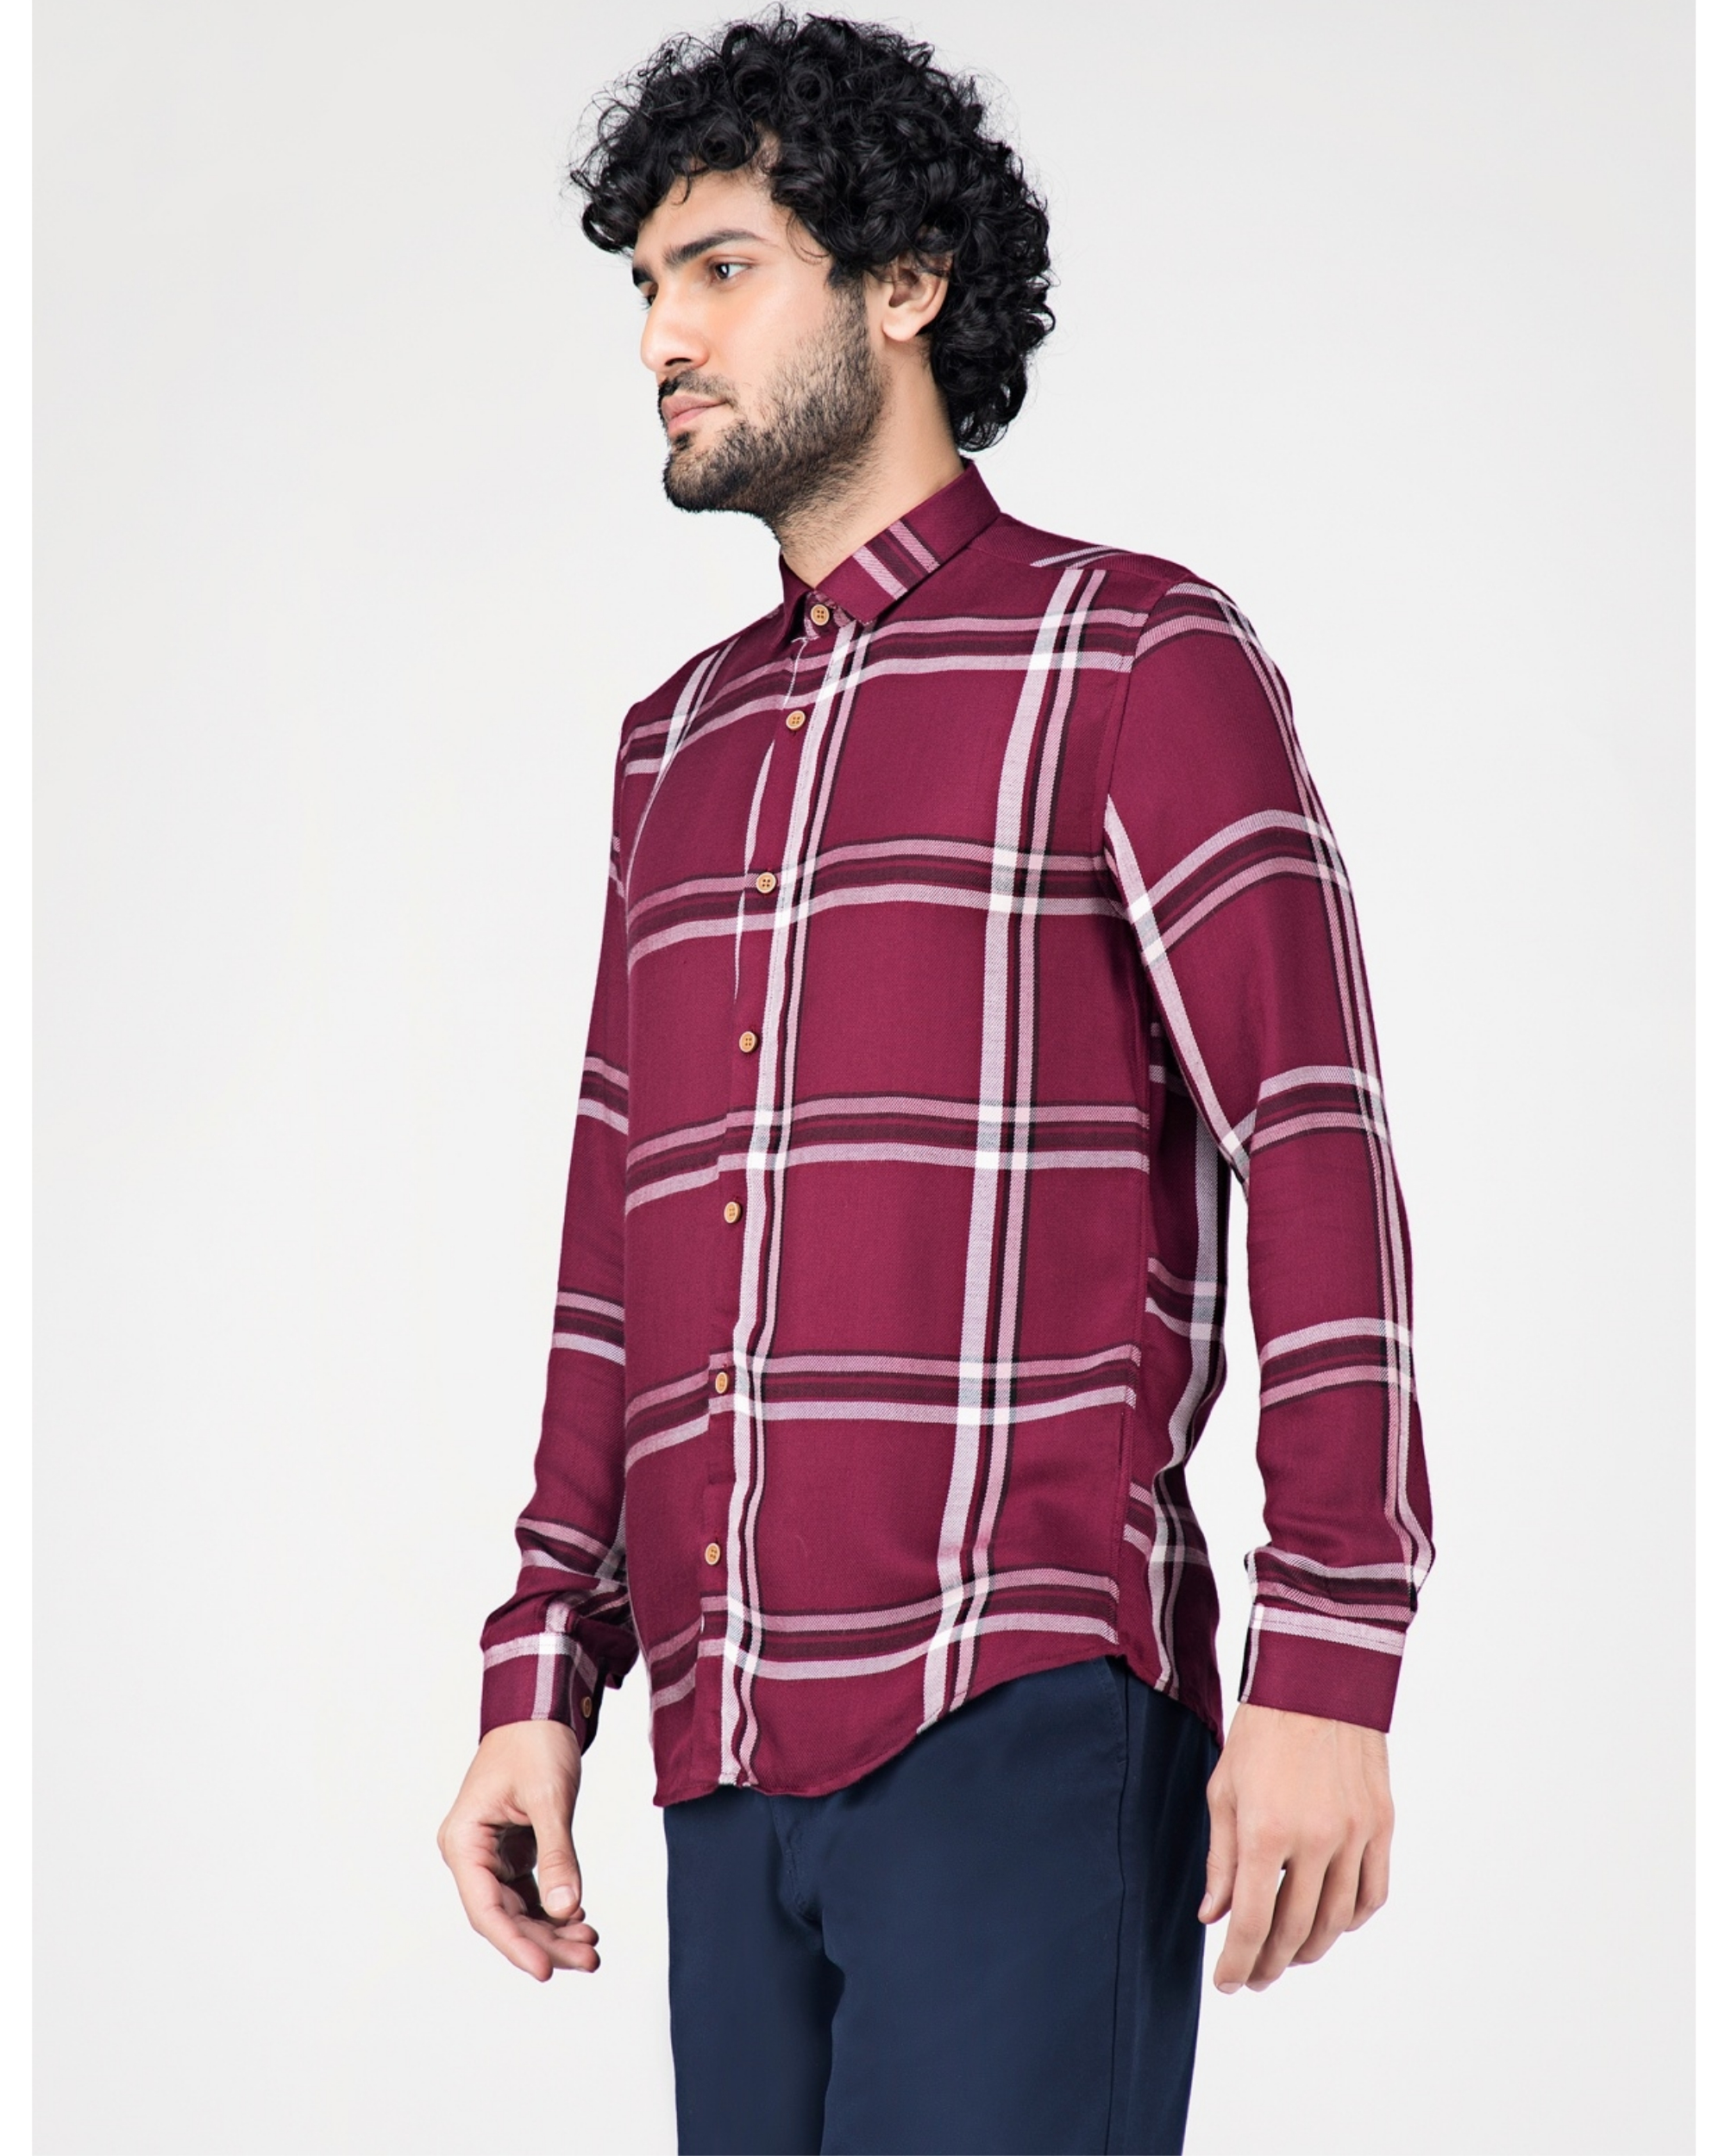 Maroon and white window pane checkered shirt by Green Hill | The Secret ...